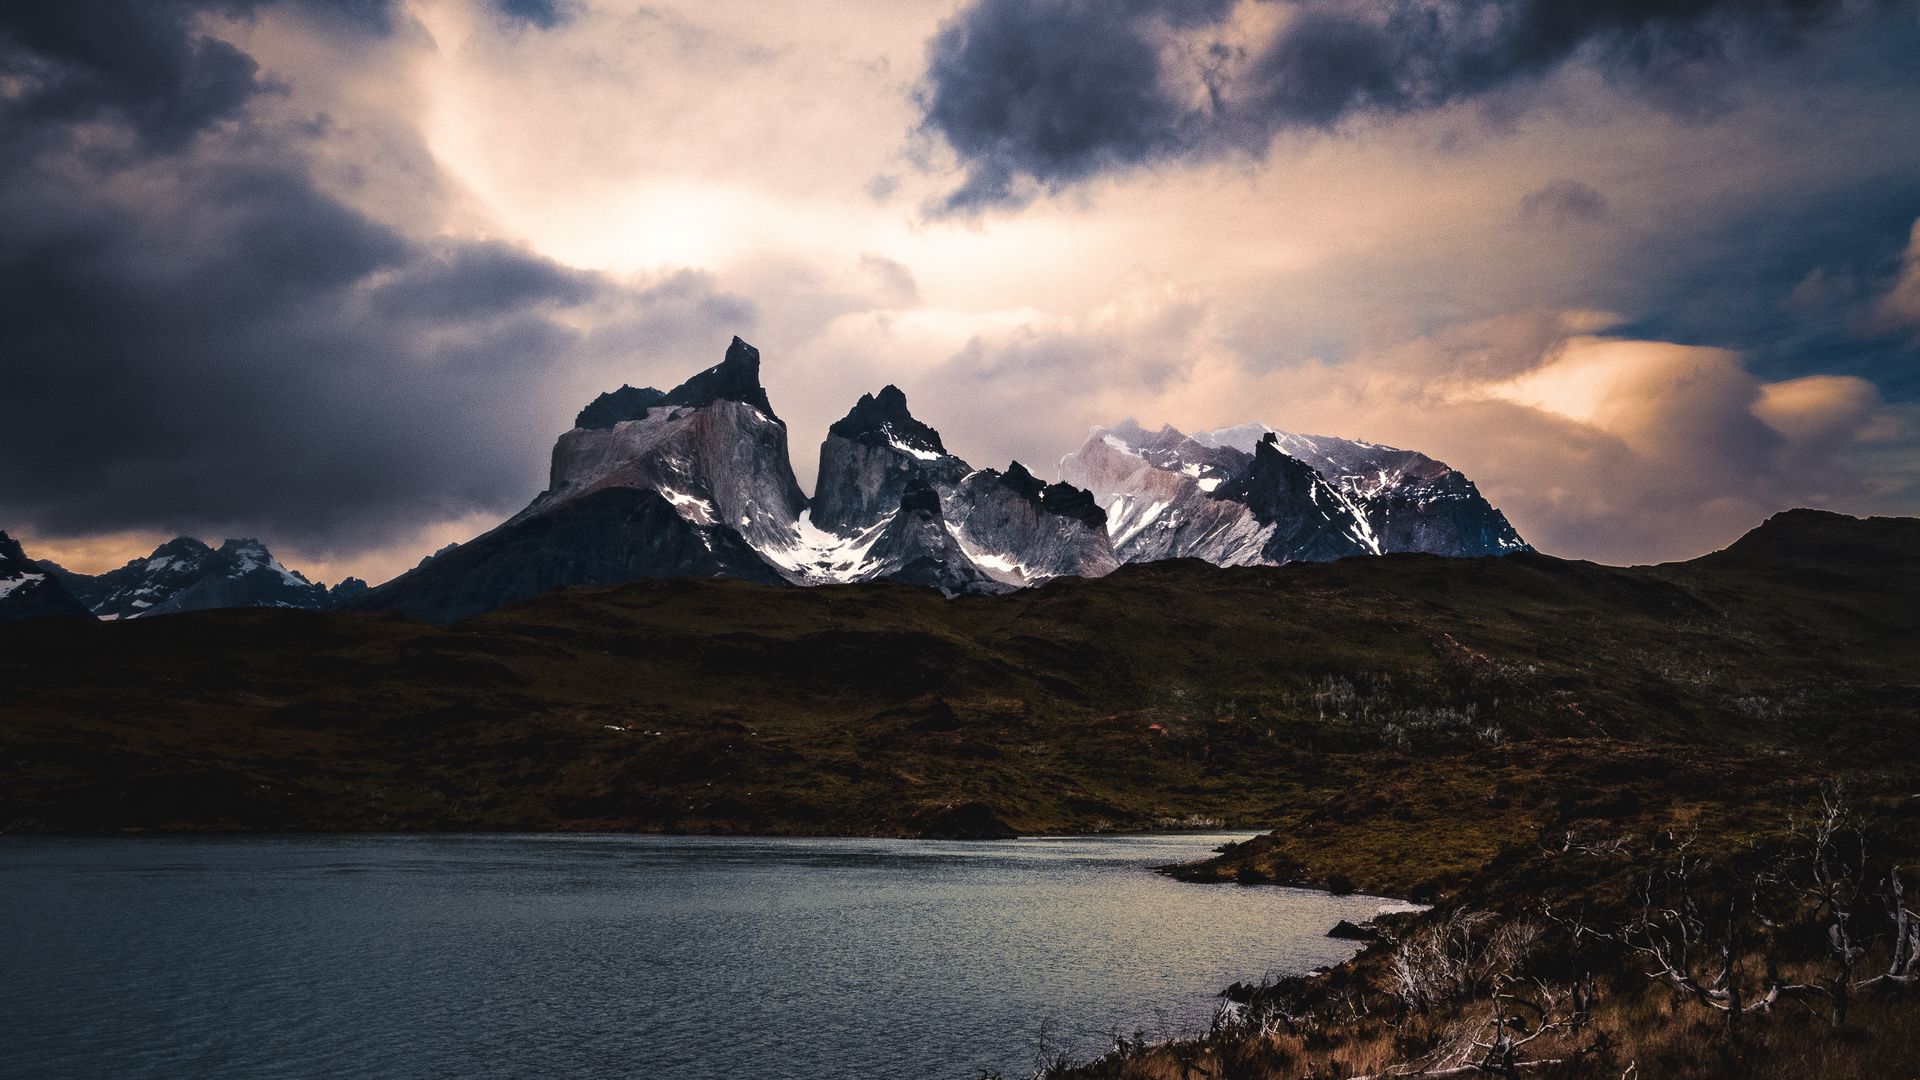 Download wallpaper 1920x1080 mountains, lake, grass, clouds, overcast ...